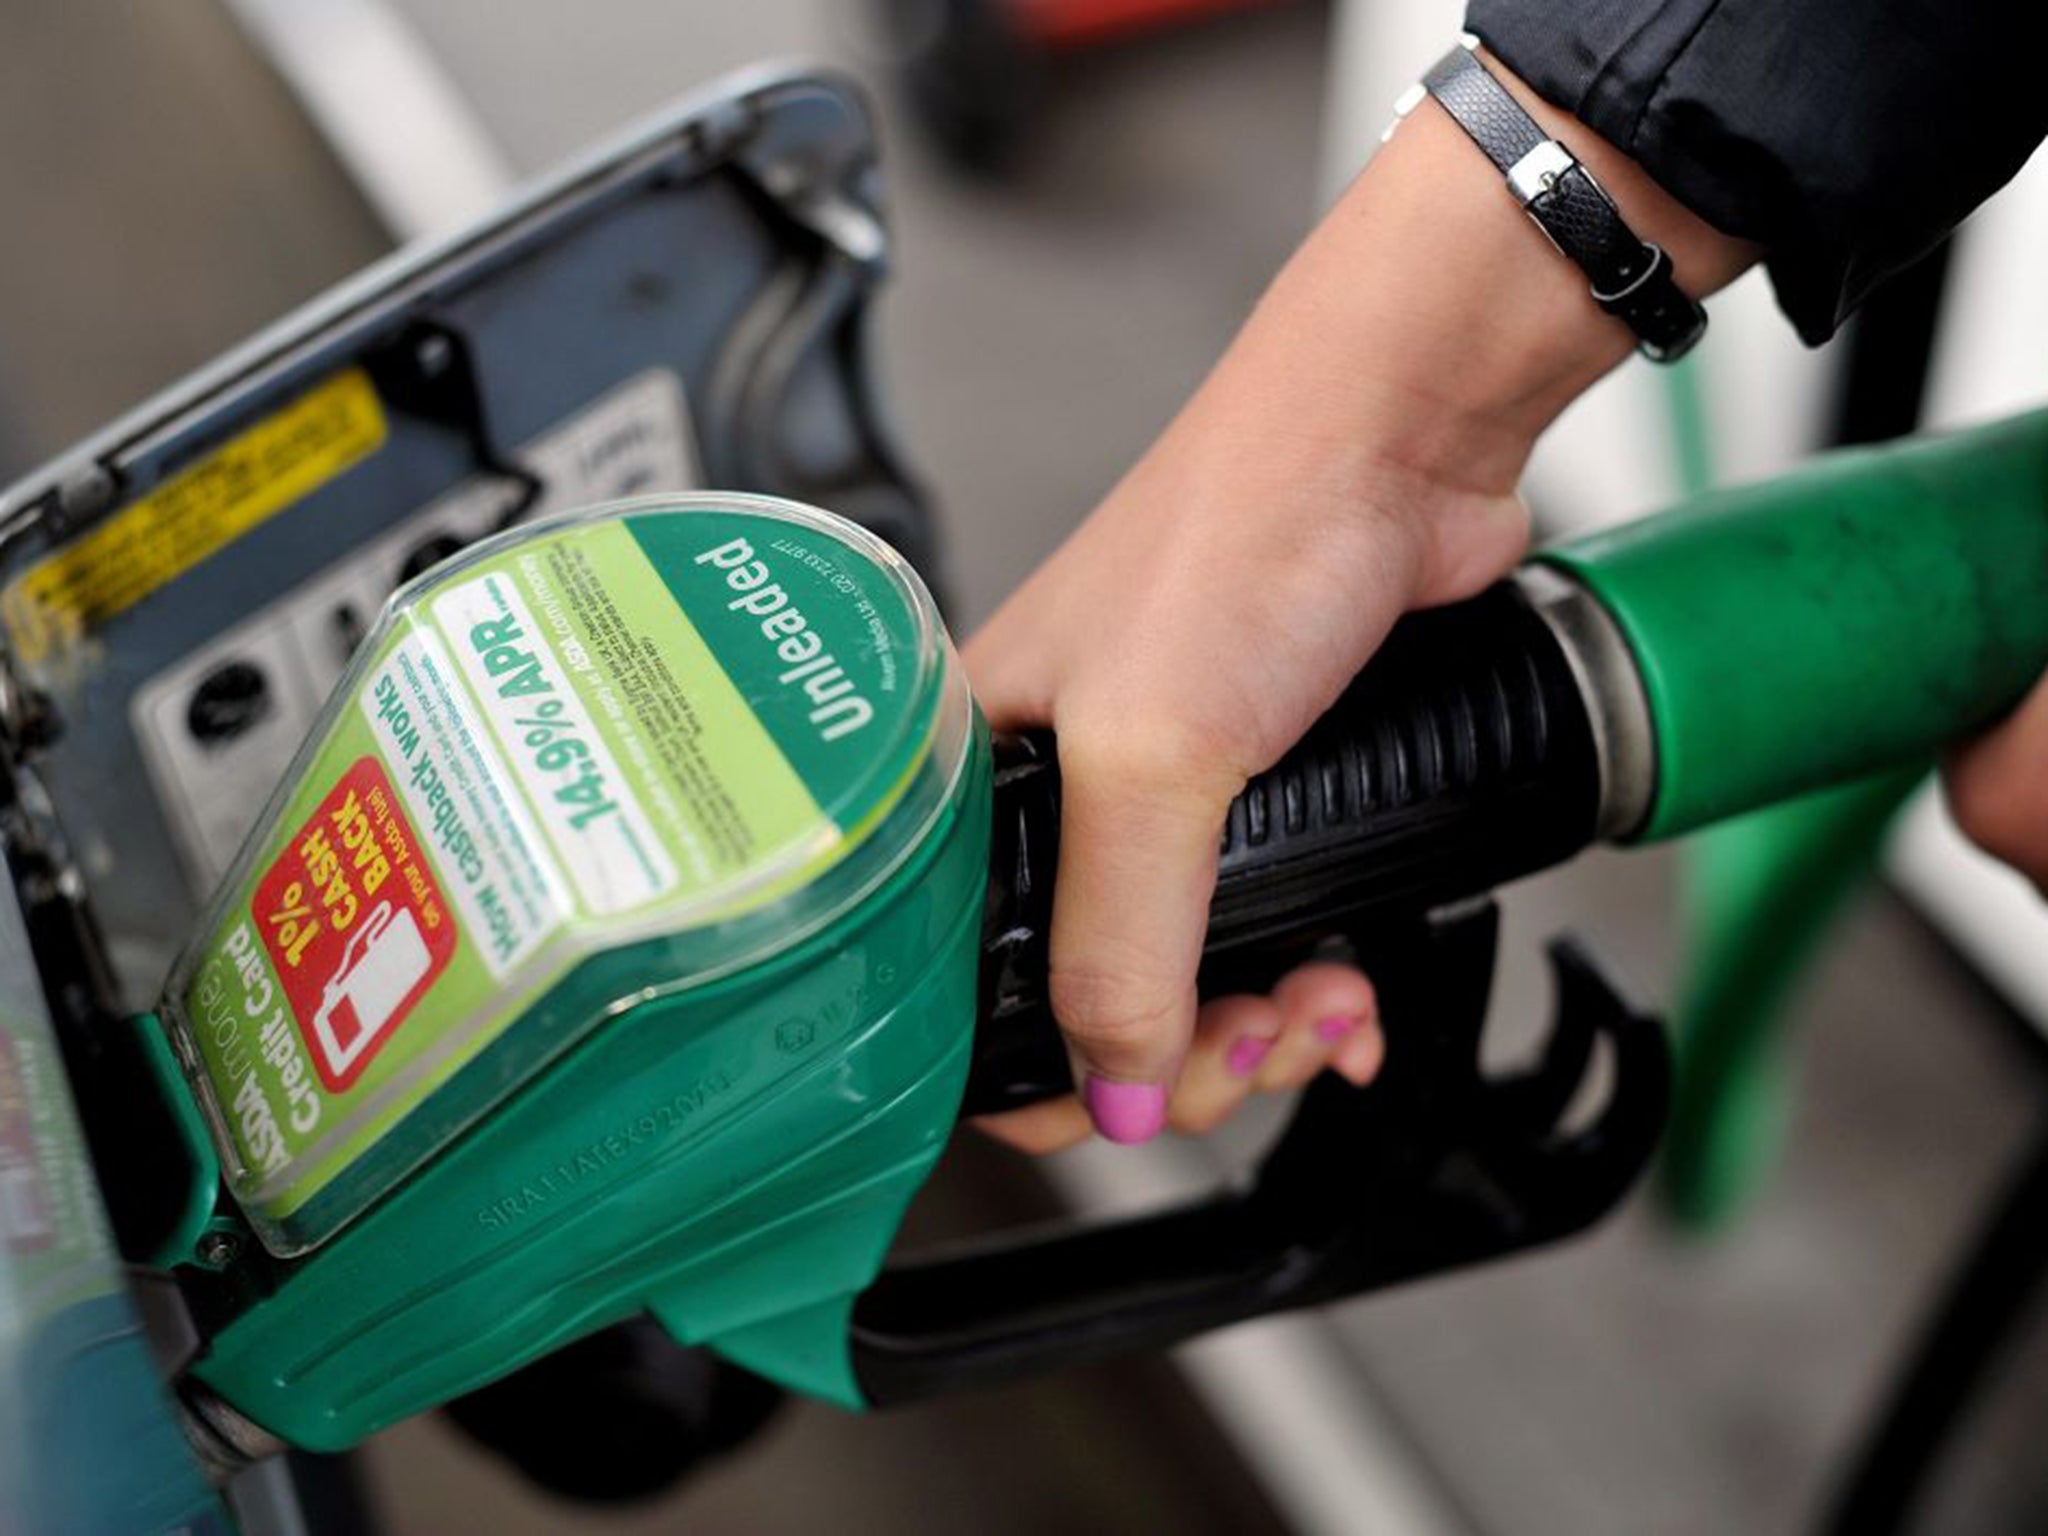 Supermarkets, which account for 16 per cent of the UK’s forecourts but more than 40 per cent of sales, are widely selling petrol below the £1 a litre mark